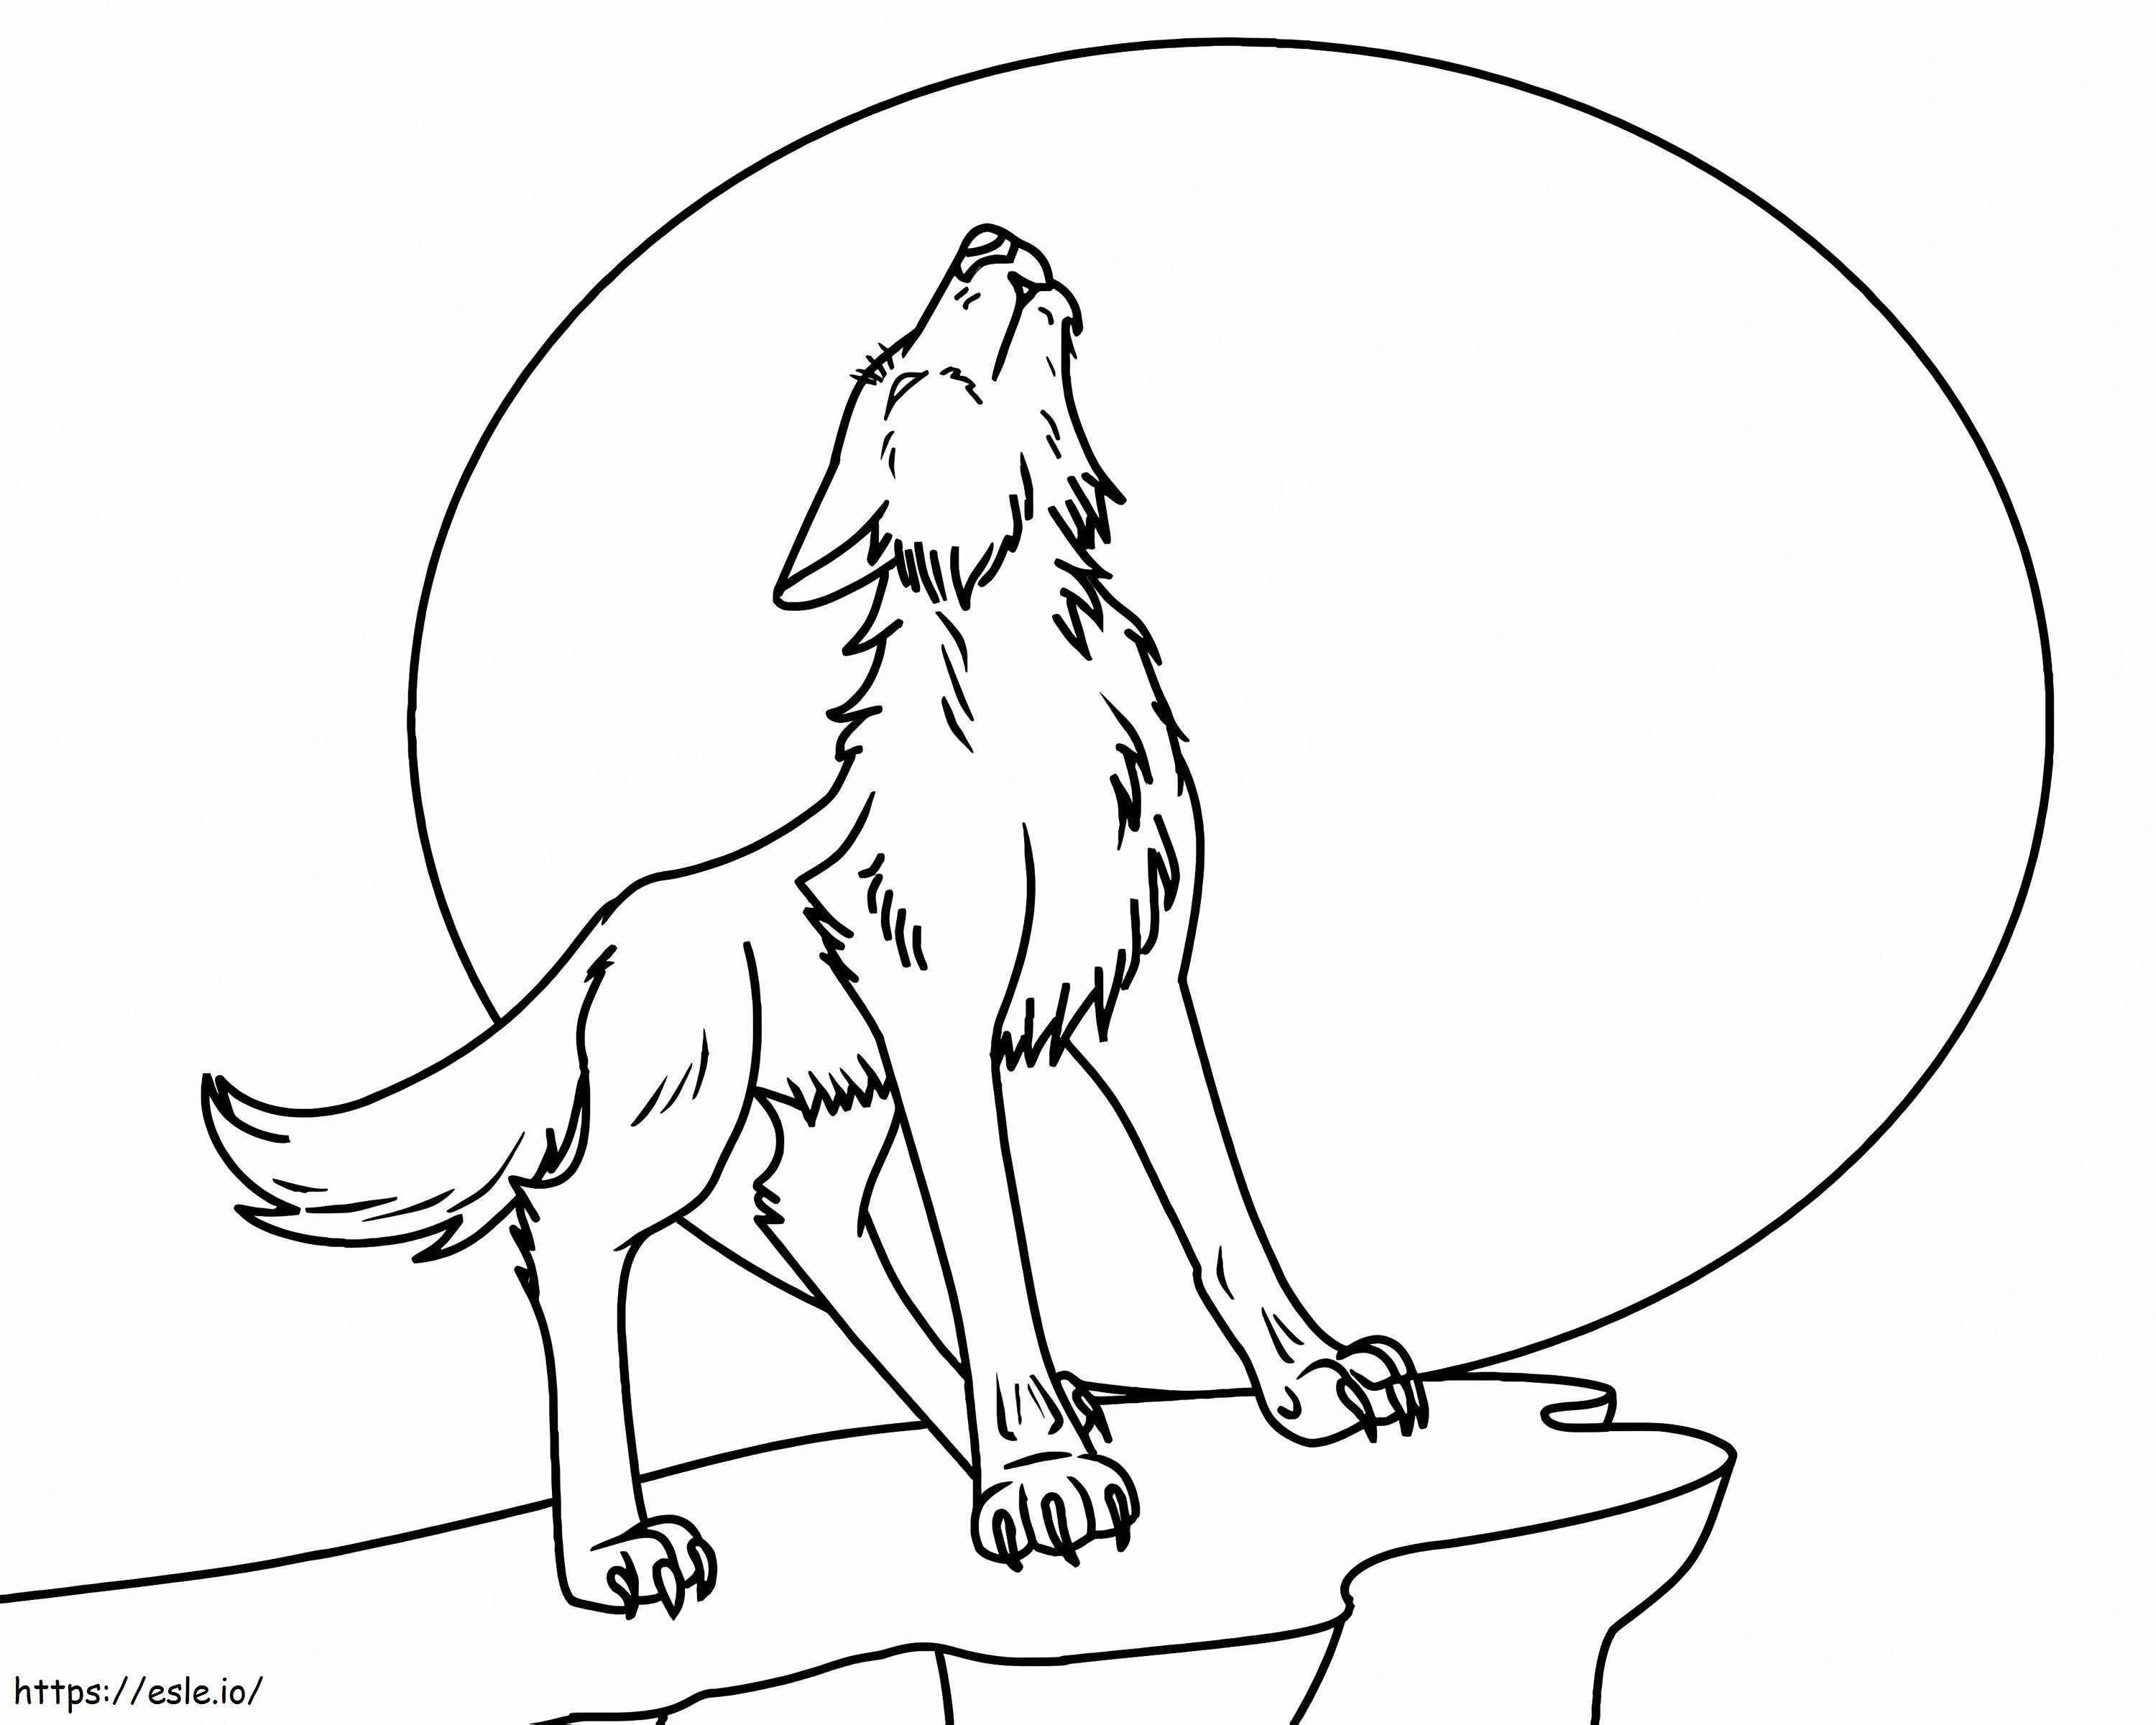 Howling Wolf coloring page